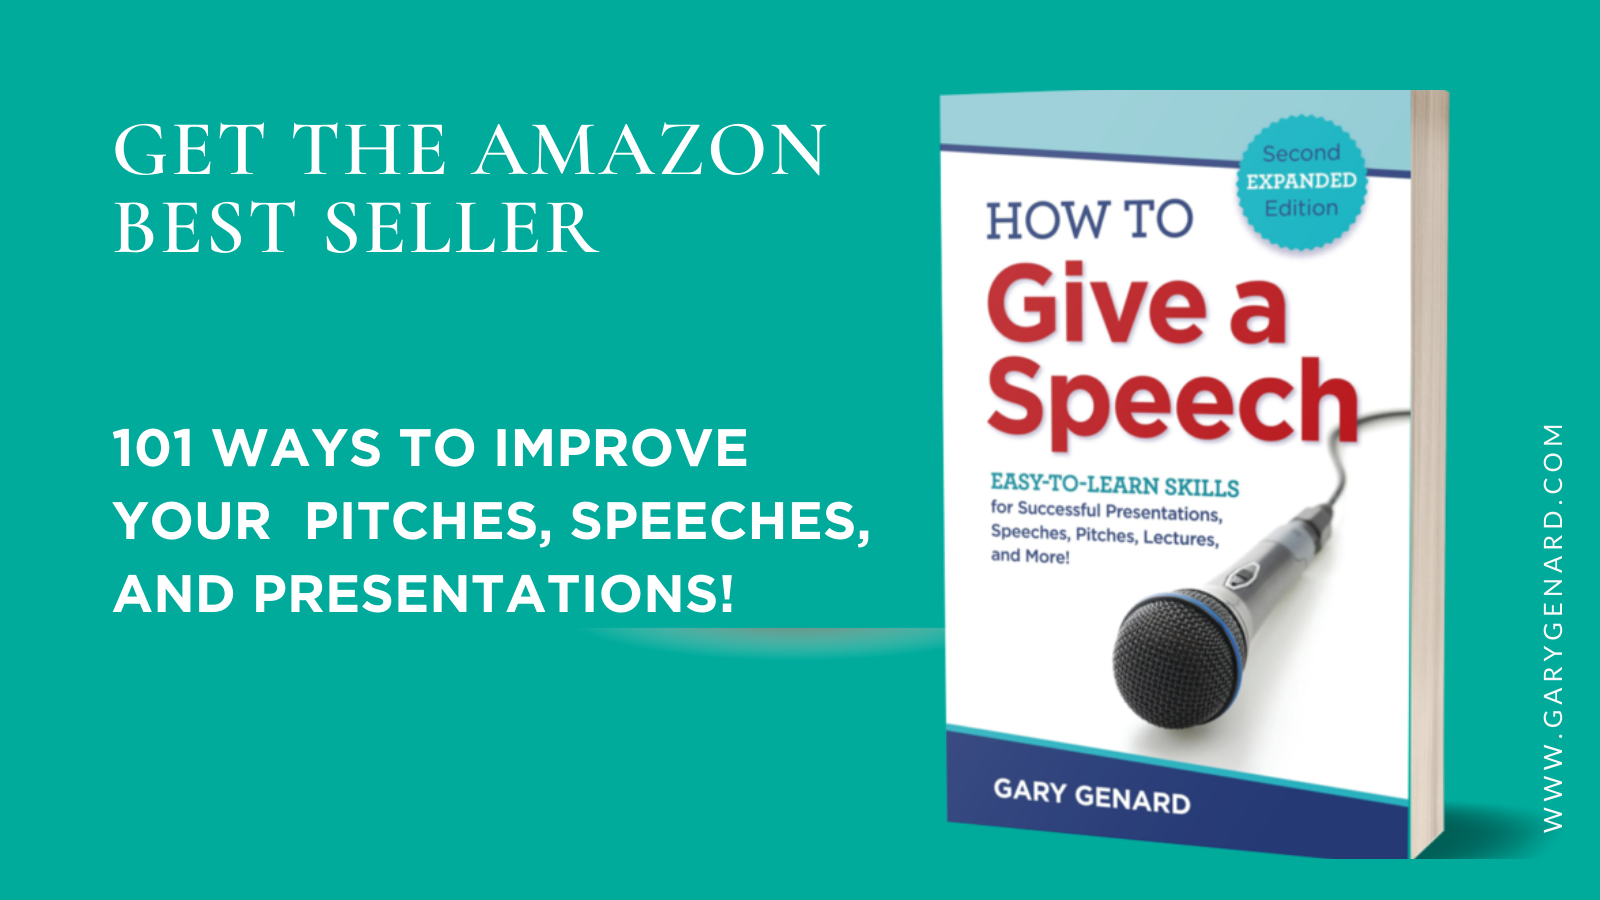 How to Give a Speech: 101 Ways to Improve Your Speeches and Presentations